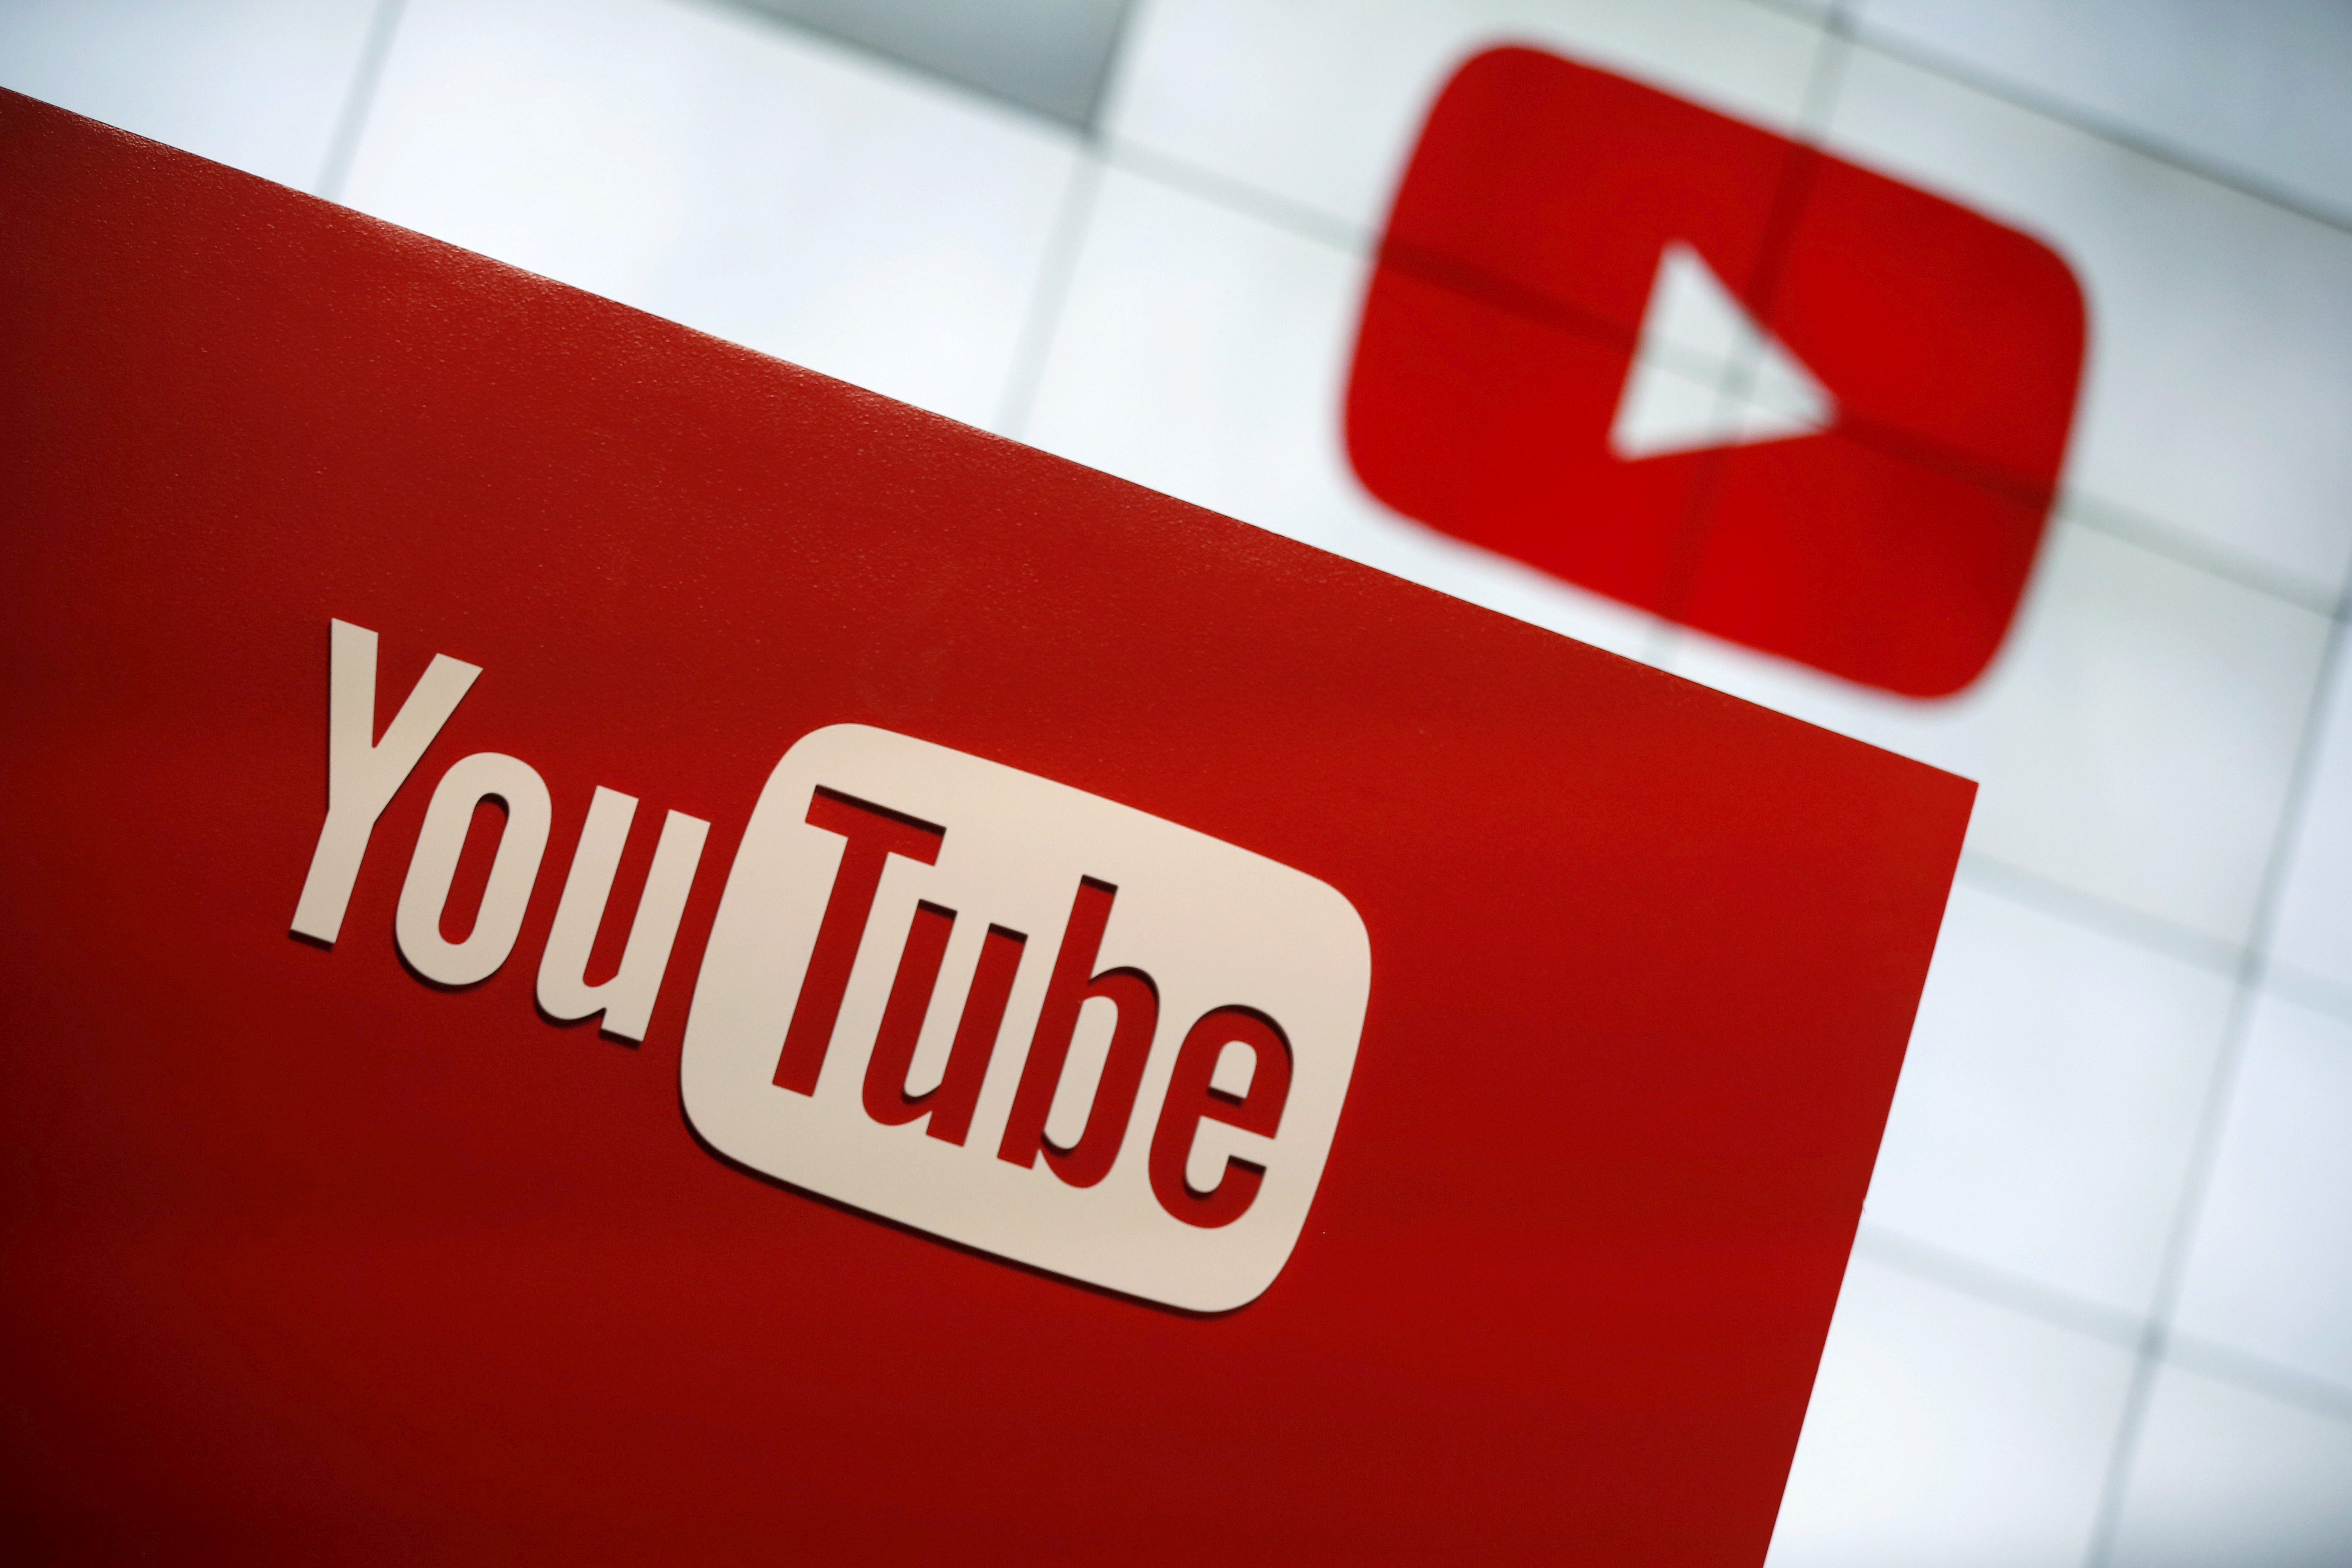 YouTube suspends Trump’s channel after violating policy on inciting violence